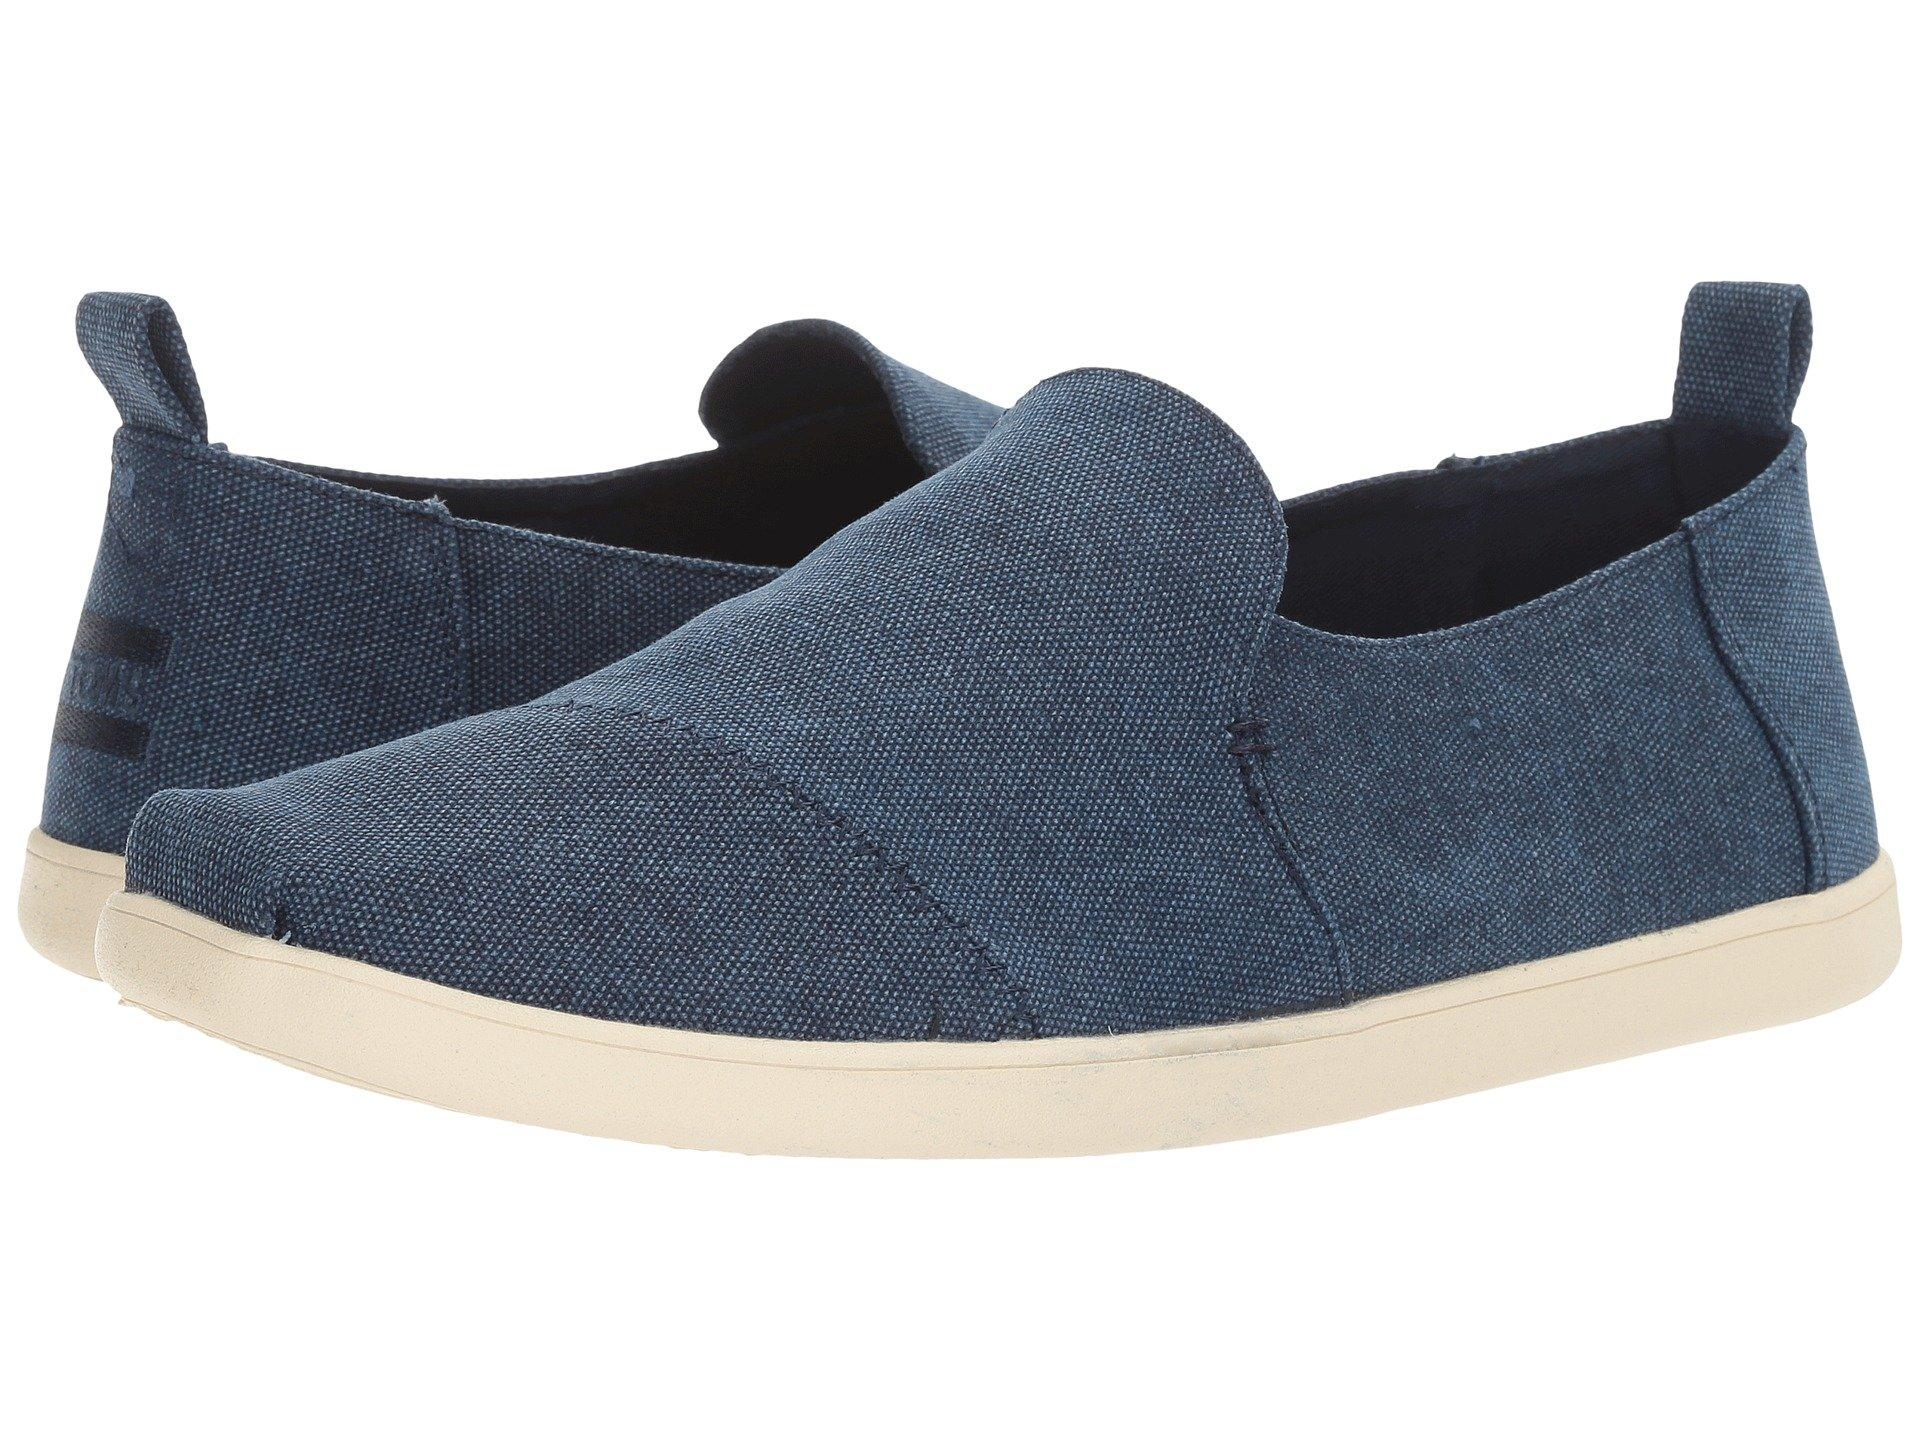 Toms Deconstructed Alpargata In Navy 